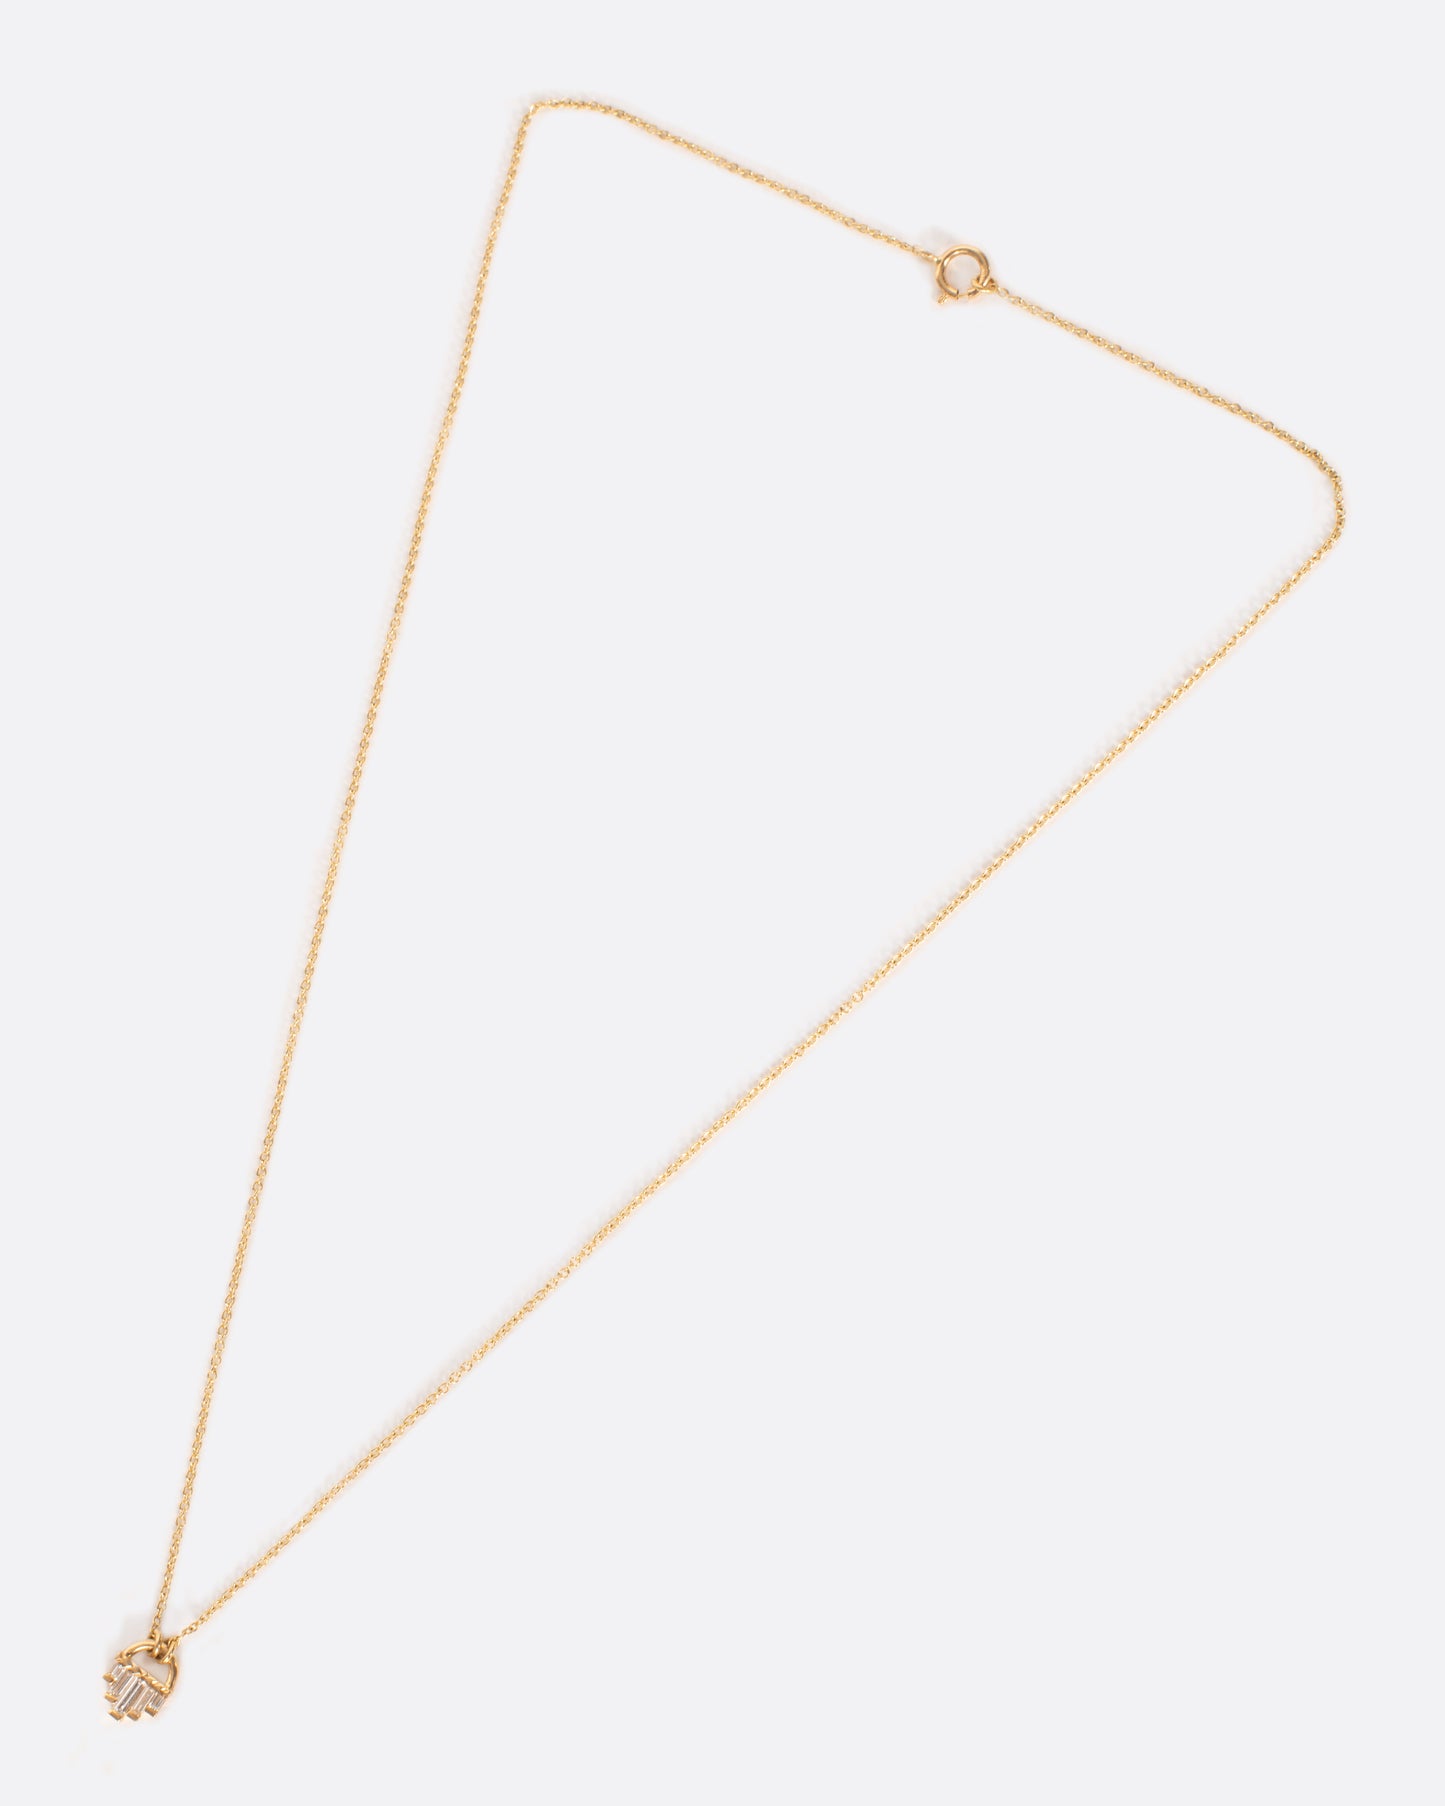 A curved gold pendant necklace with five diamond baguettes.